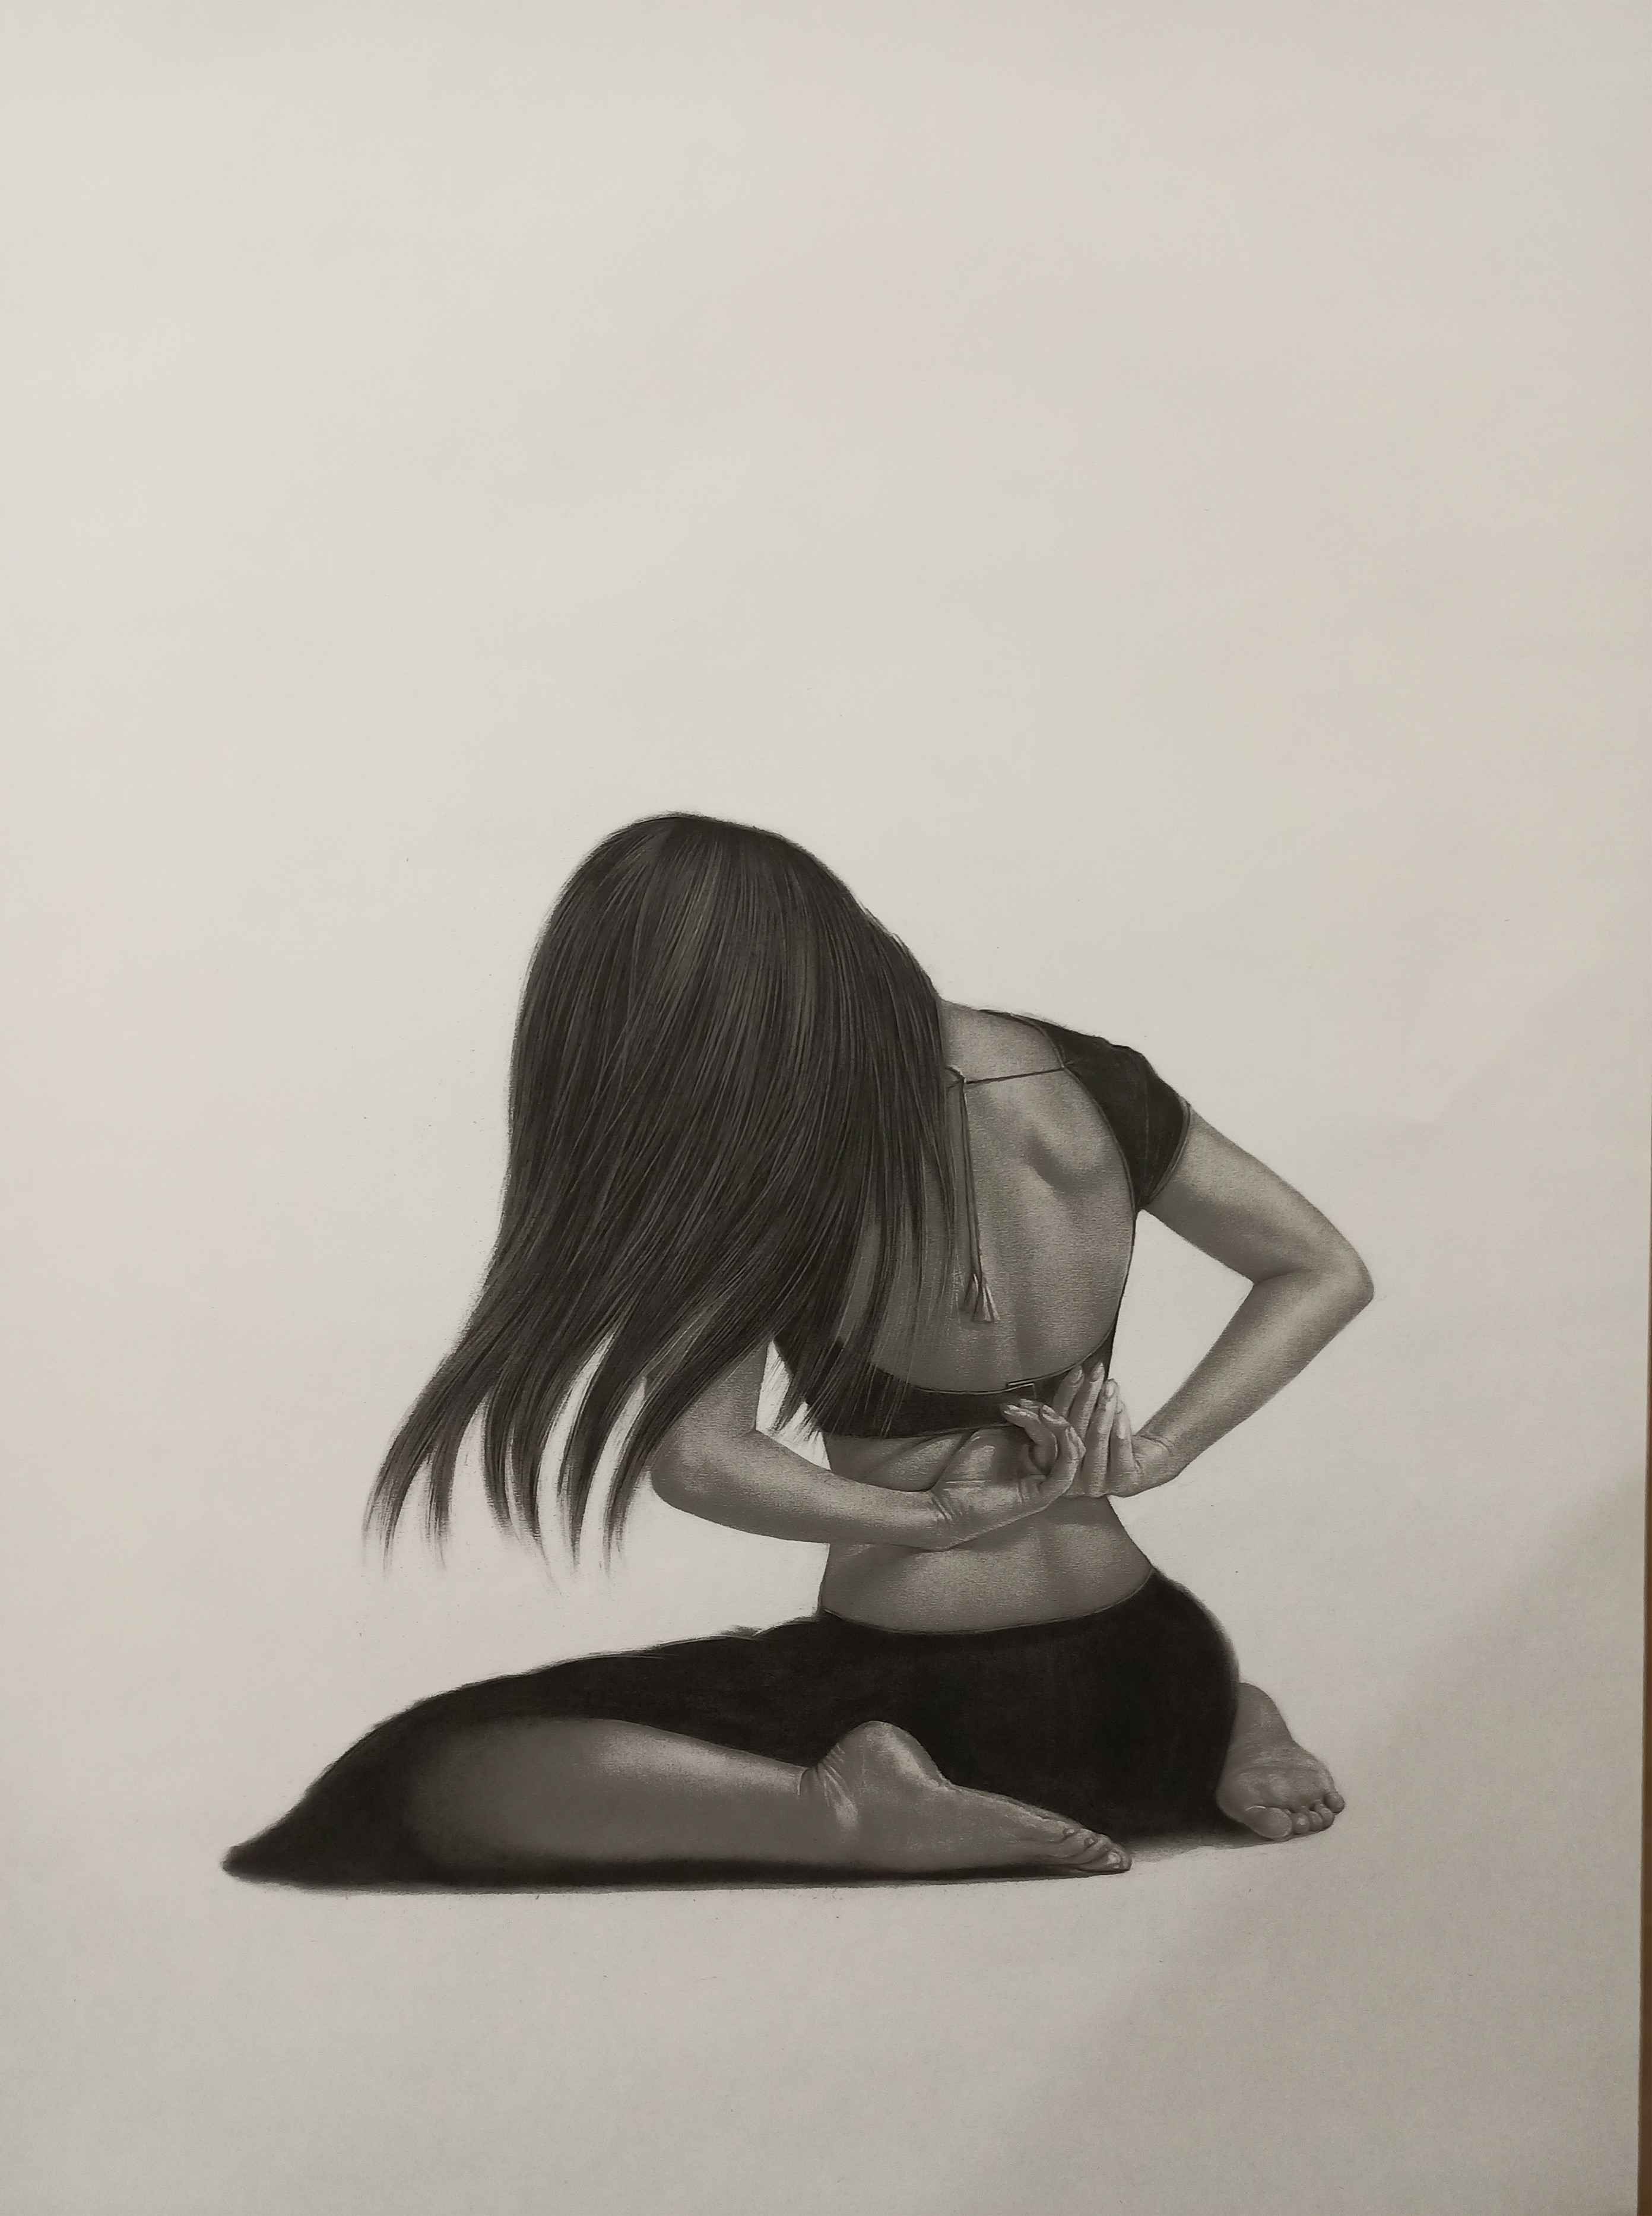 Title: UNTITLED 01<br> Medium: Graphite andCharcoal on paper<br> Size: 43x30 inches